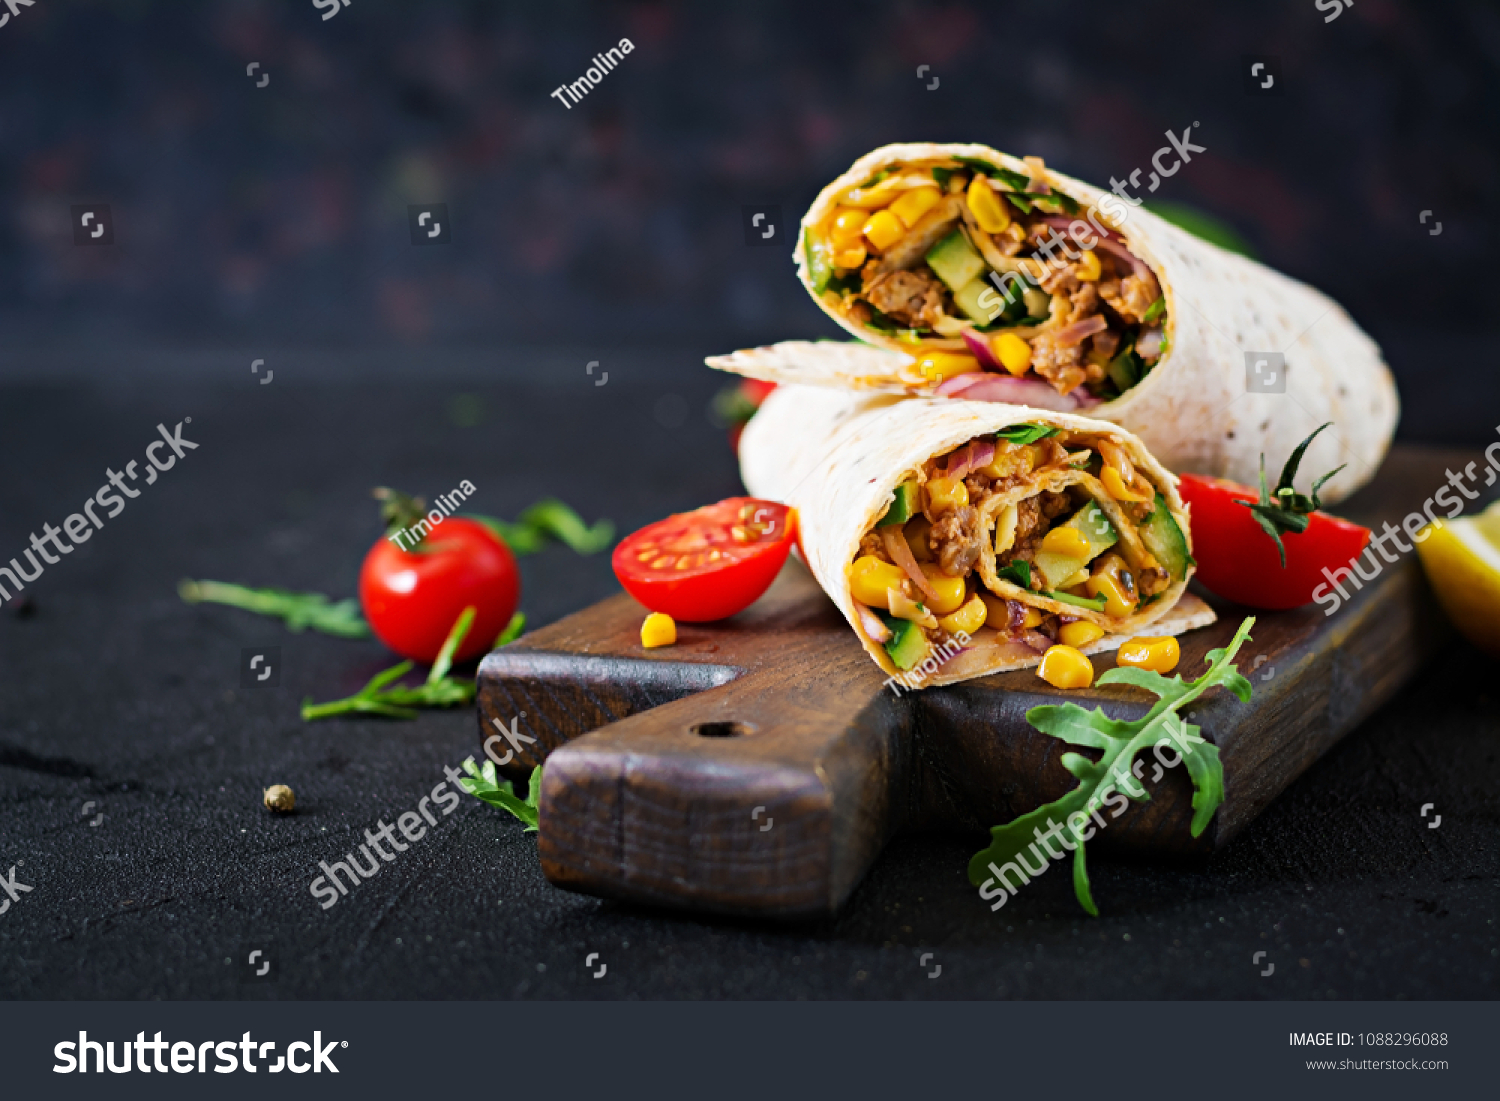 Burritos wraps with beef and vegetables on  black background. Beef burrito, mexican food. #1088296088